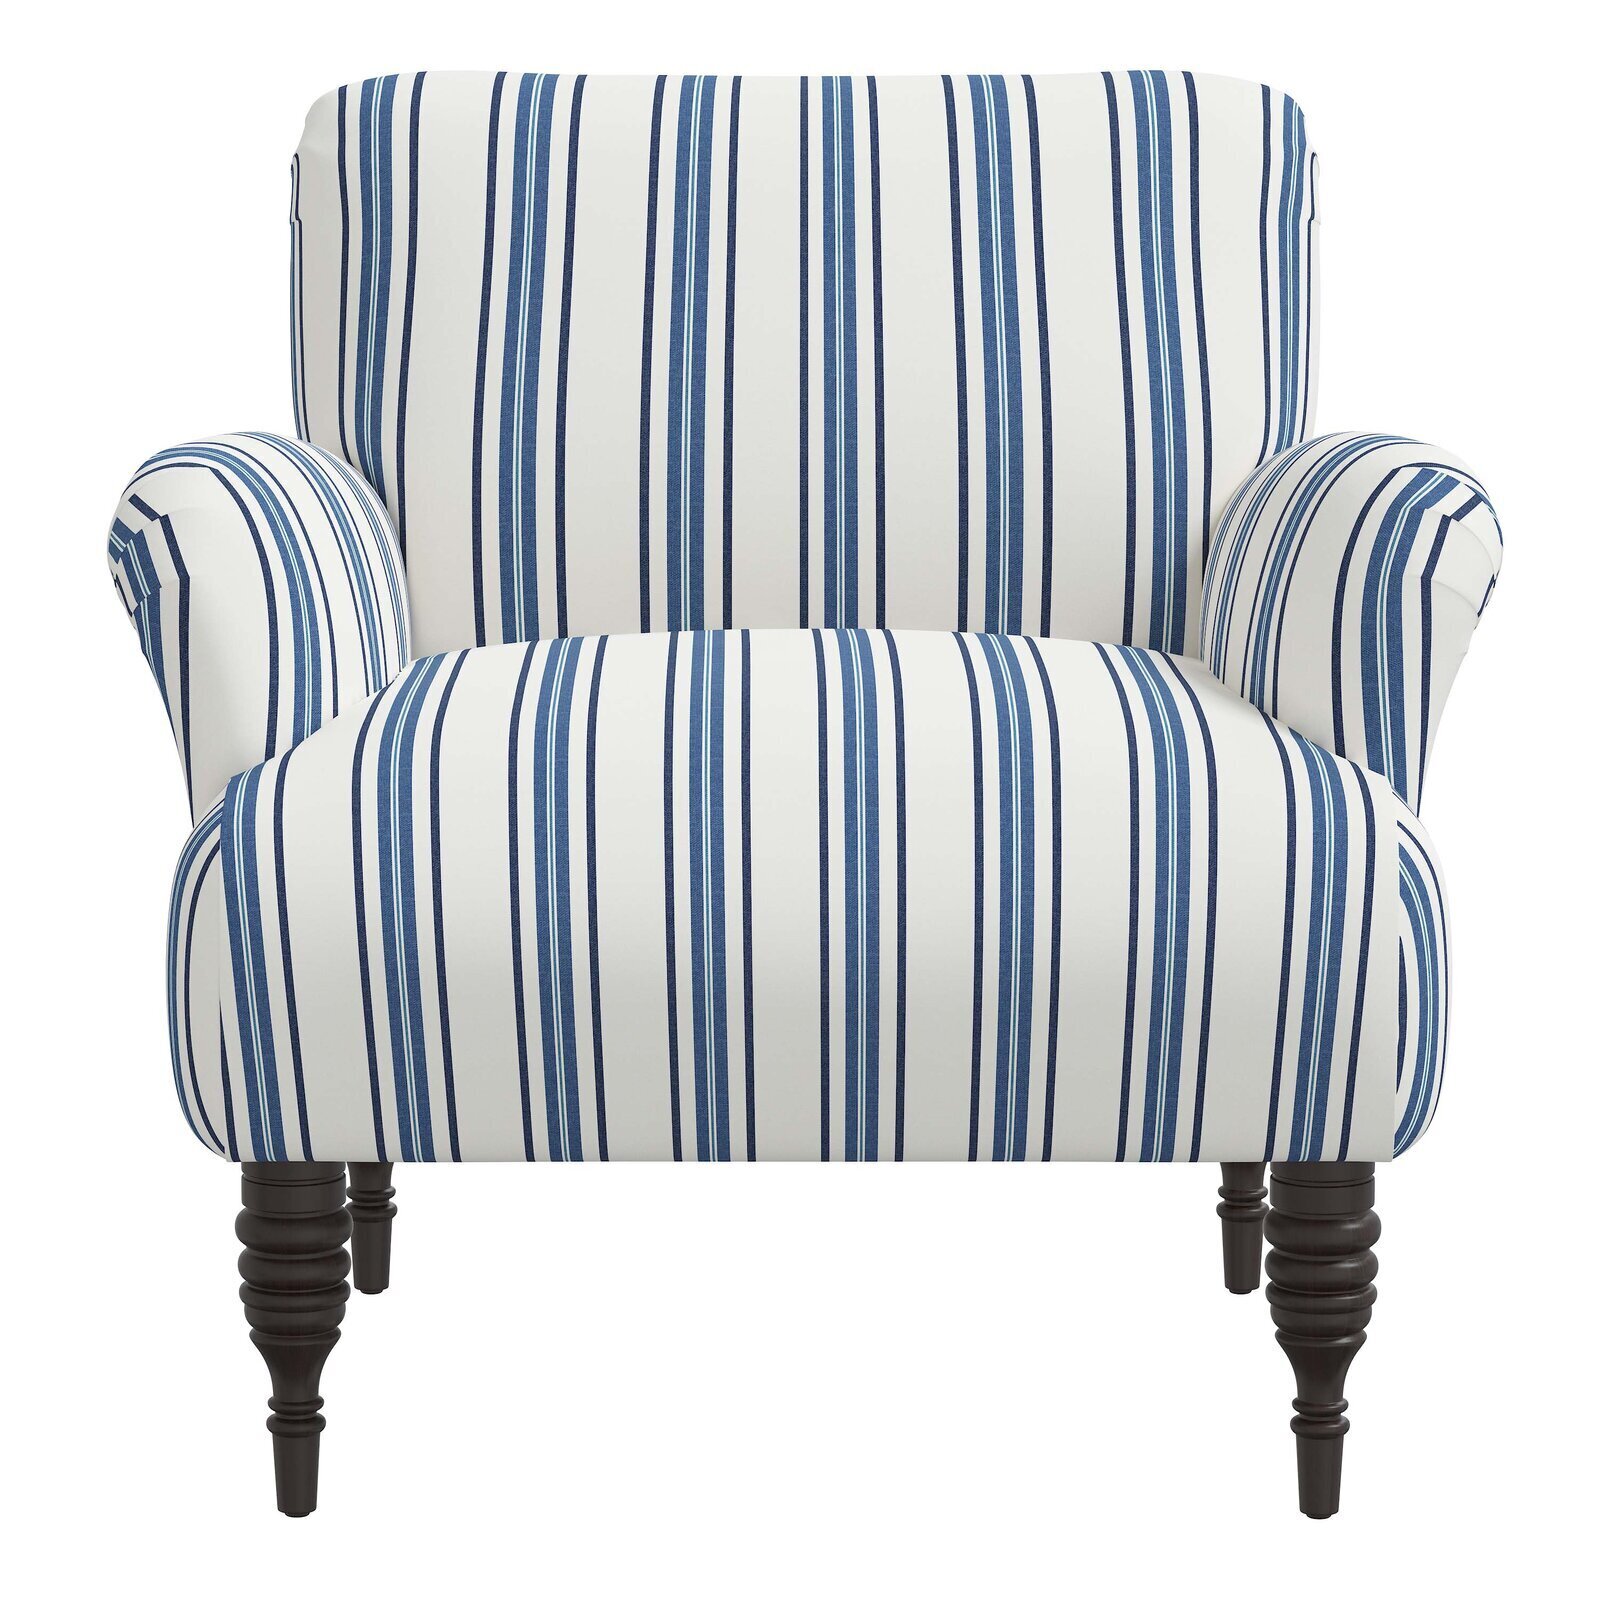 Brash Blue and White Striped Chair